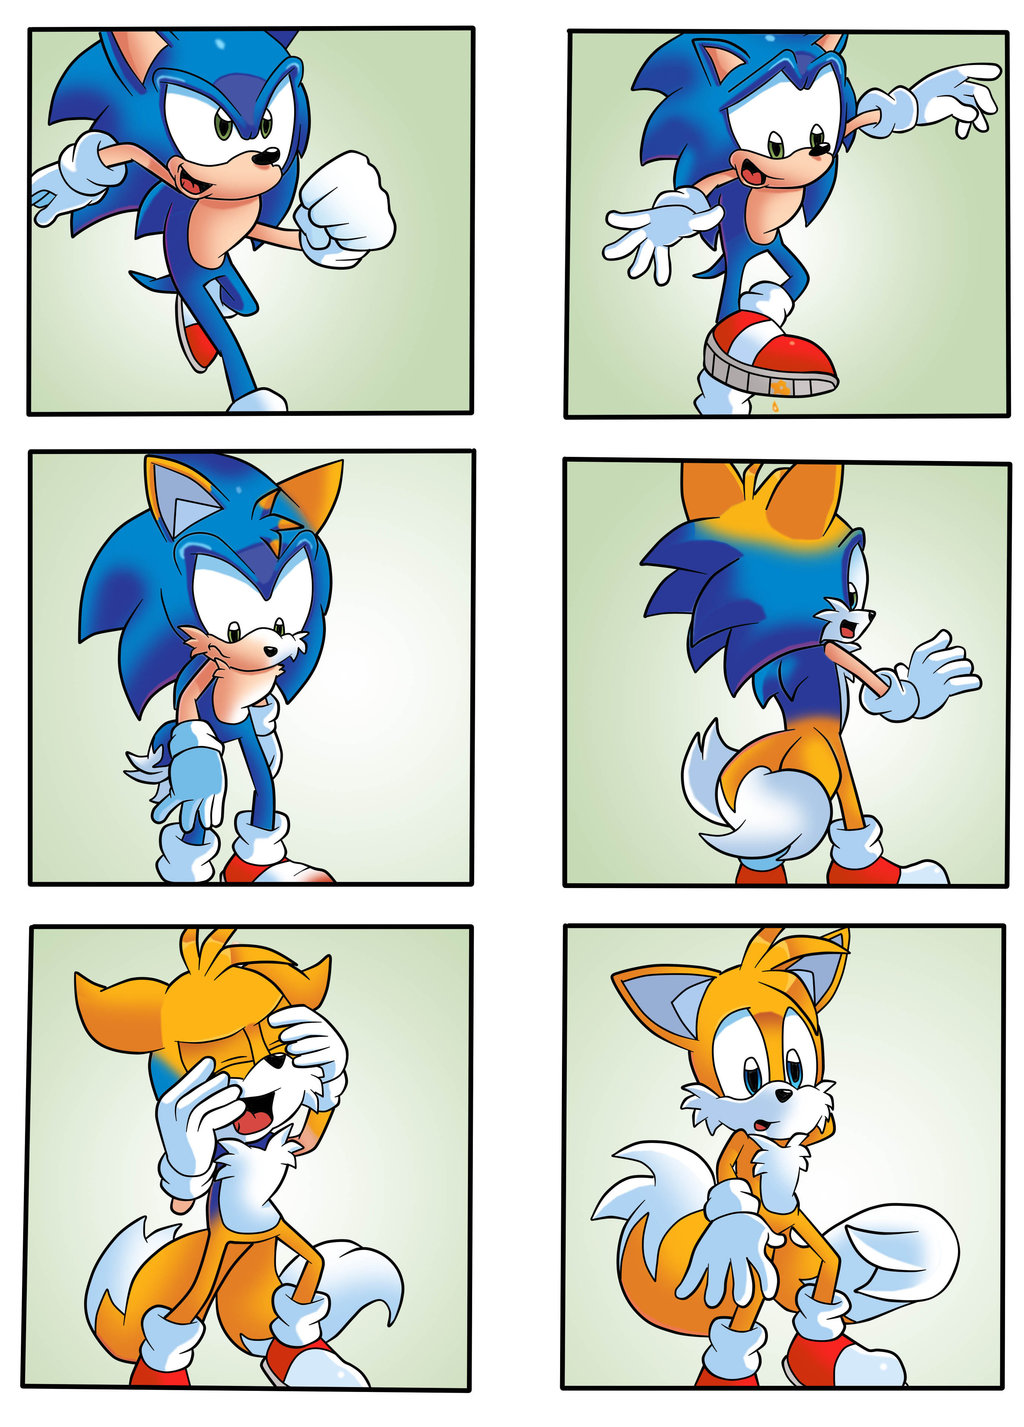 Sonic Into Tails By TheDarkShadow1990 On DeviantArt.